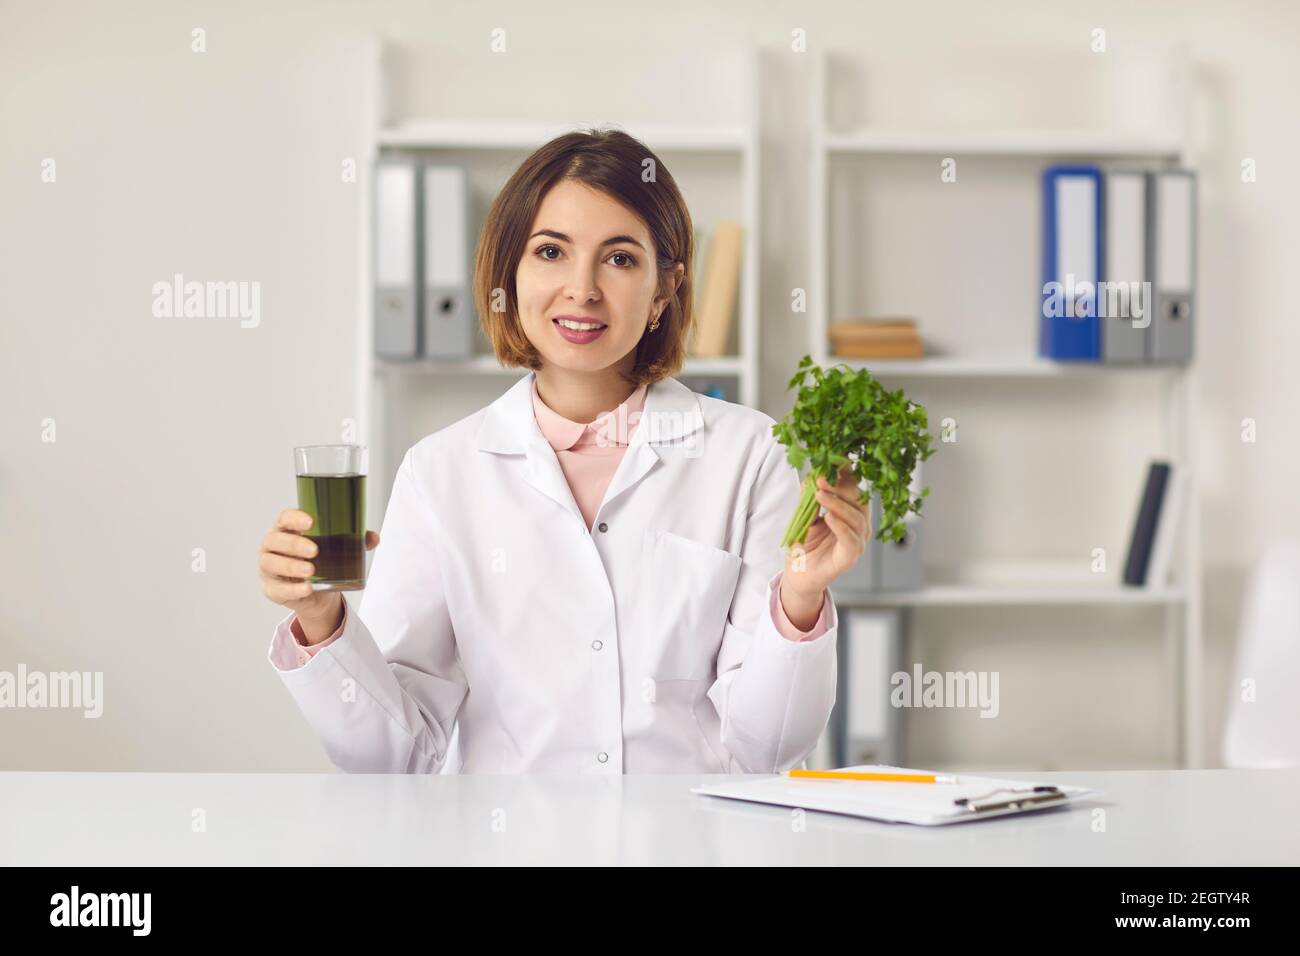 Dietitian sitting in clinic office, looking at camera and holding fresh detox parsley drink Stock Photo